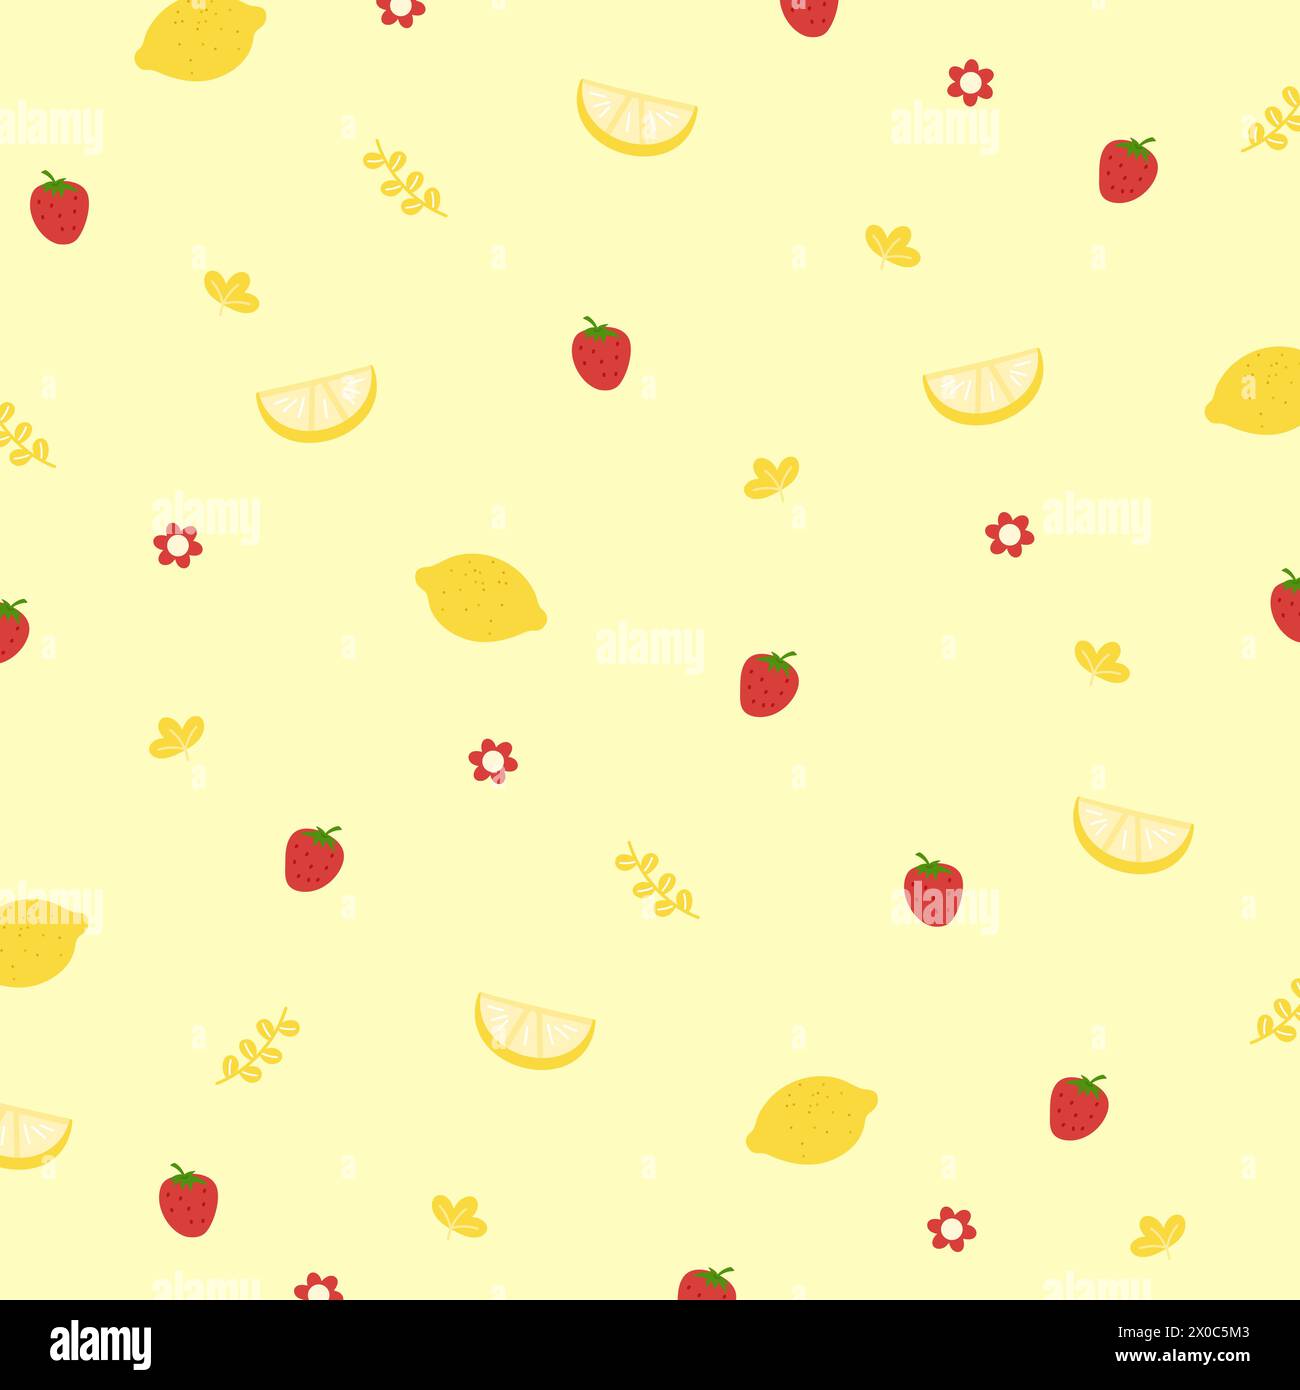 Strawberry, lemon, flower on a pastel yellow background for summer wallpaper, fabric print, fruity pattern, kid clothes, supermarket, grocery shopping Stock Vector